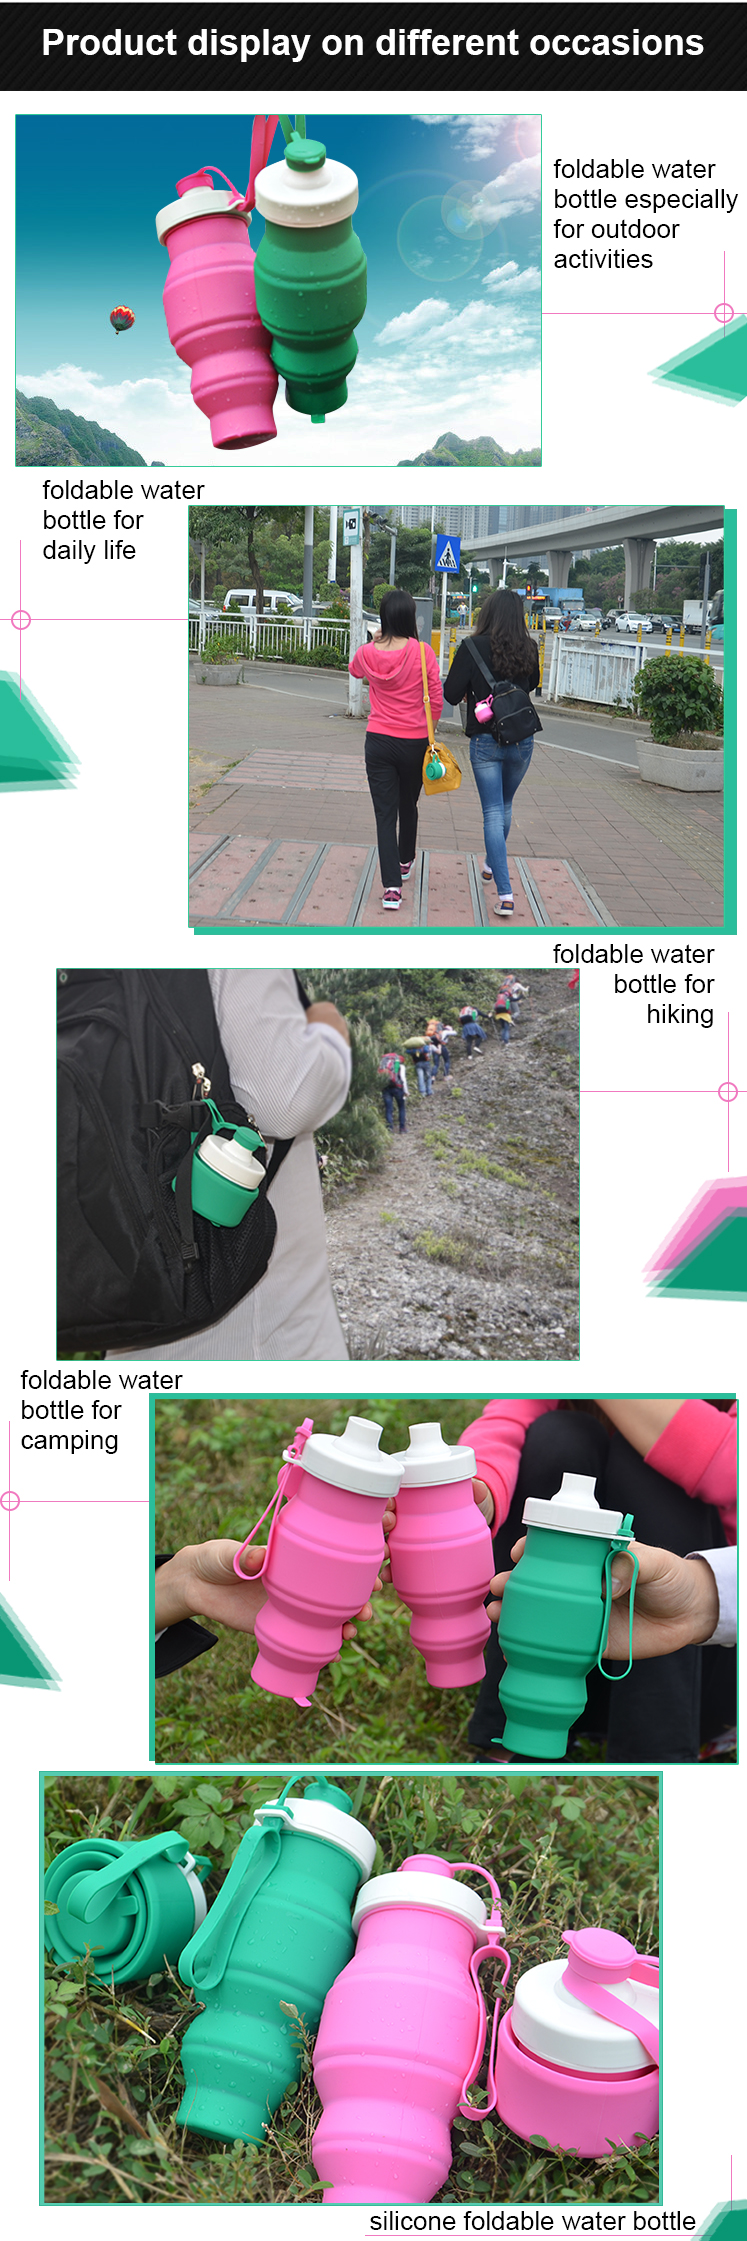 Promotional Printed Rubber Silicone Foldable Water Bottle 5